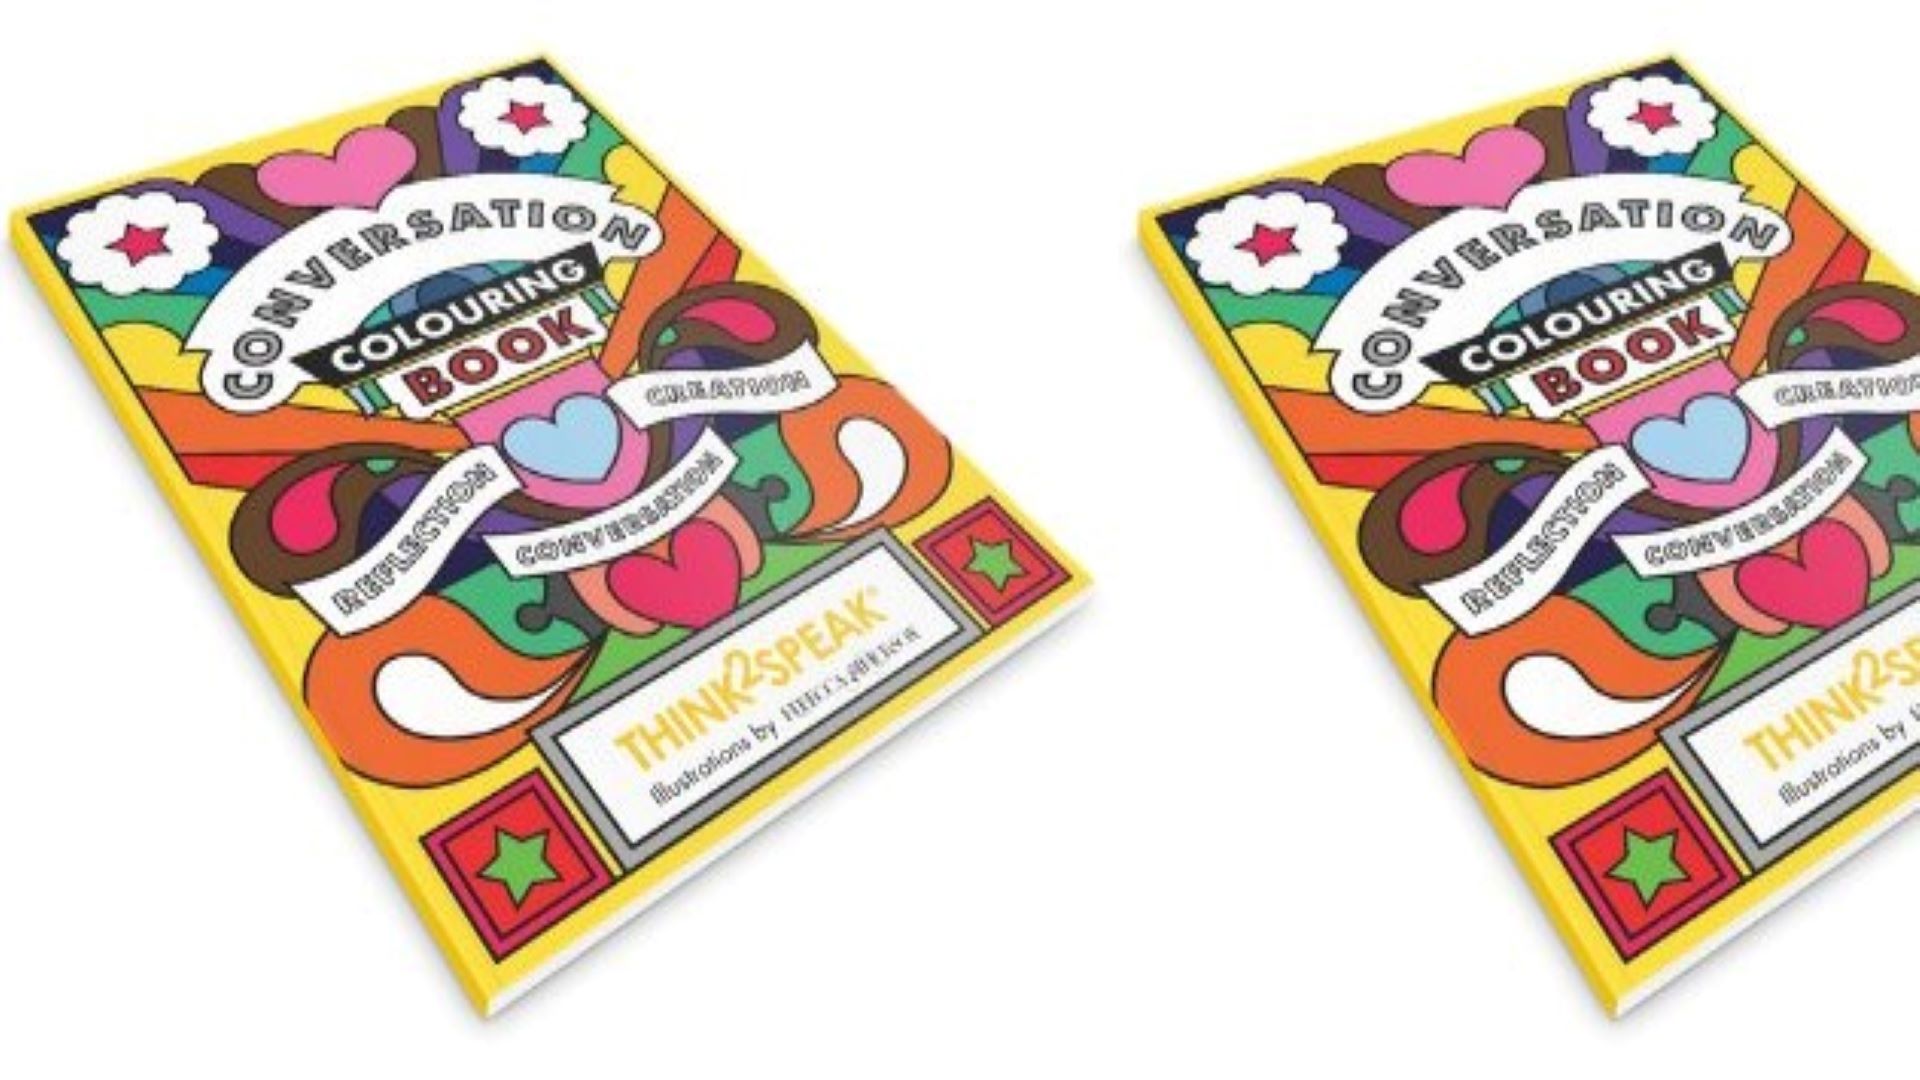 think2speak colouring books show how wellbeing can be improved through the arts